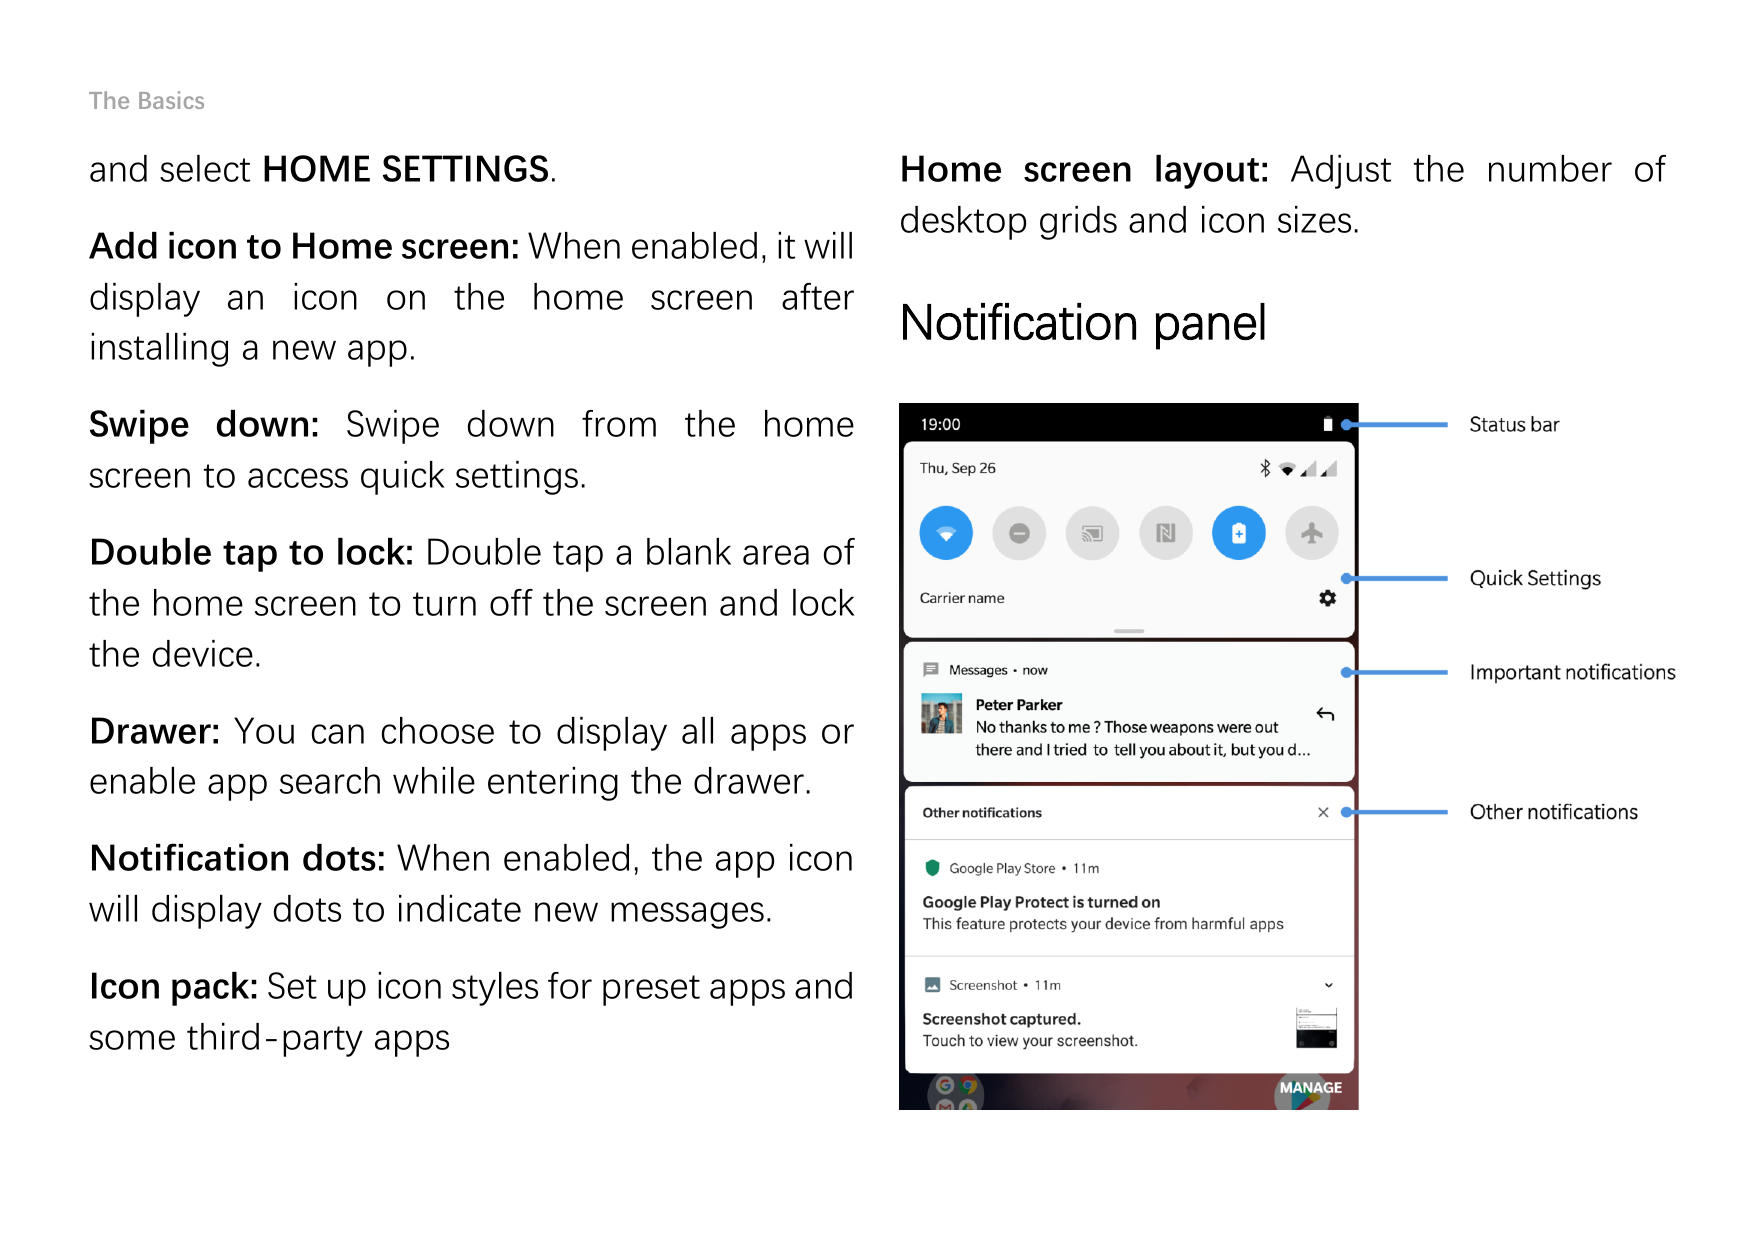 The Basicsand select HOME SETTINGS.Add icon to Home screen: When enabled, it willdisplay an icon on the home screen afterinstall